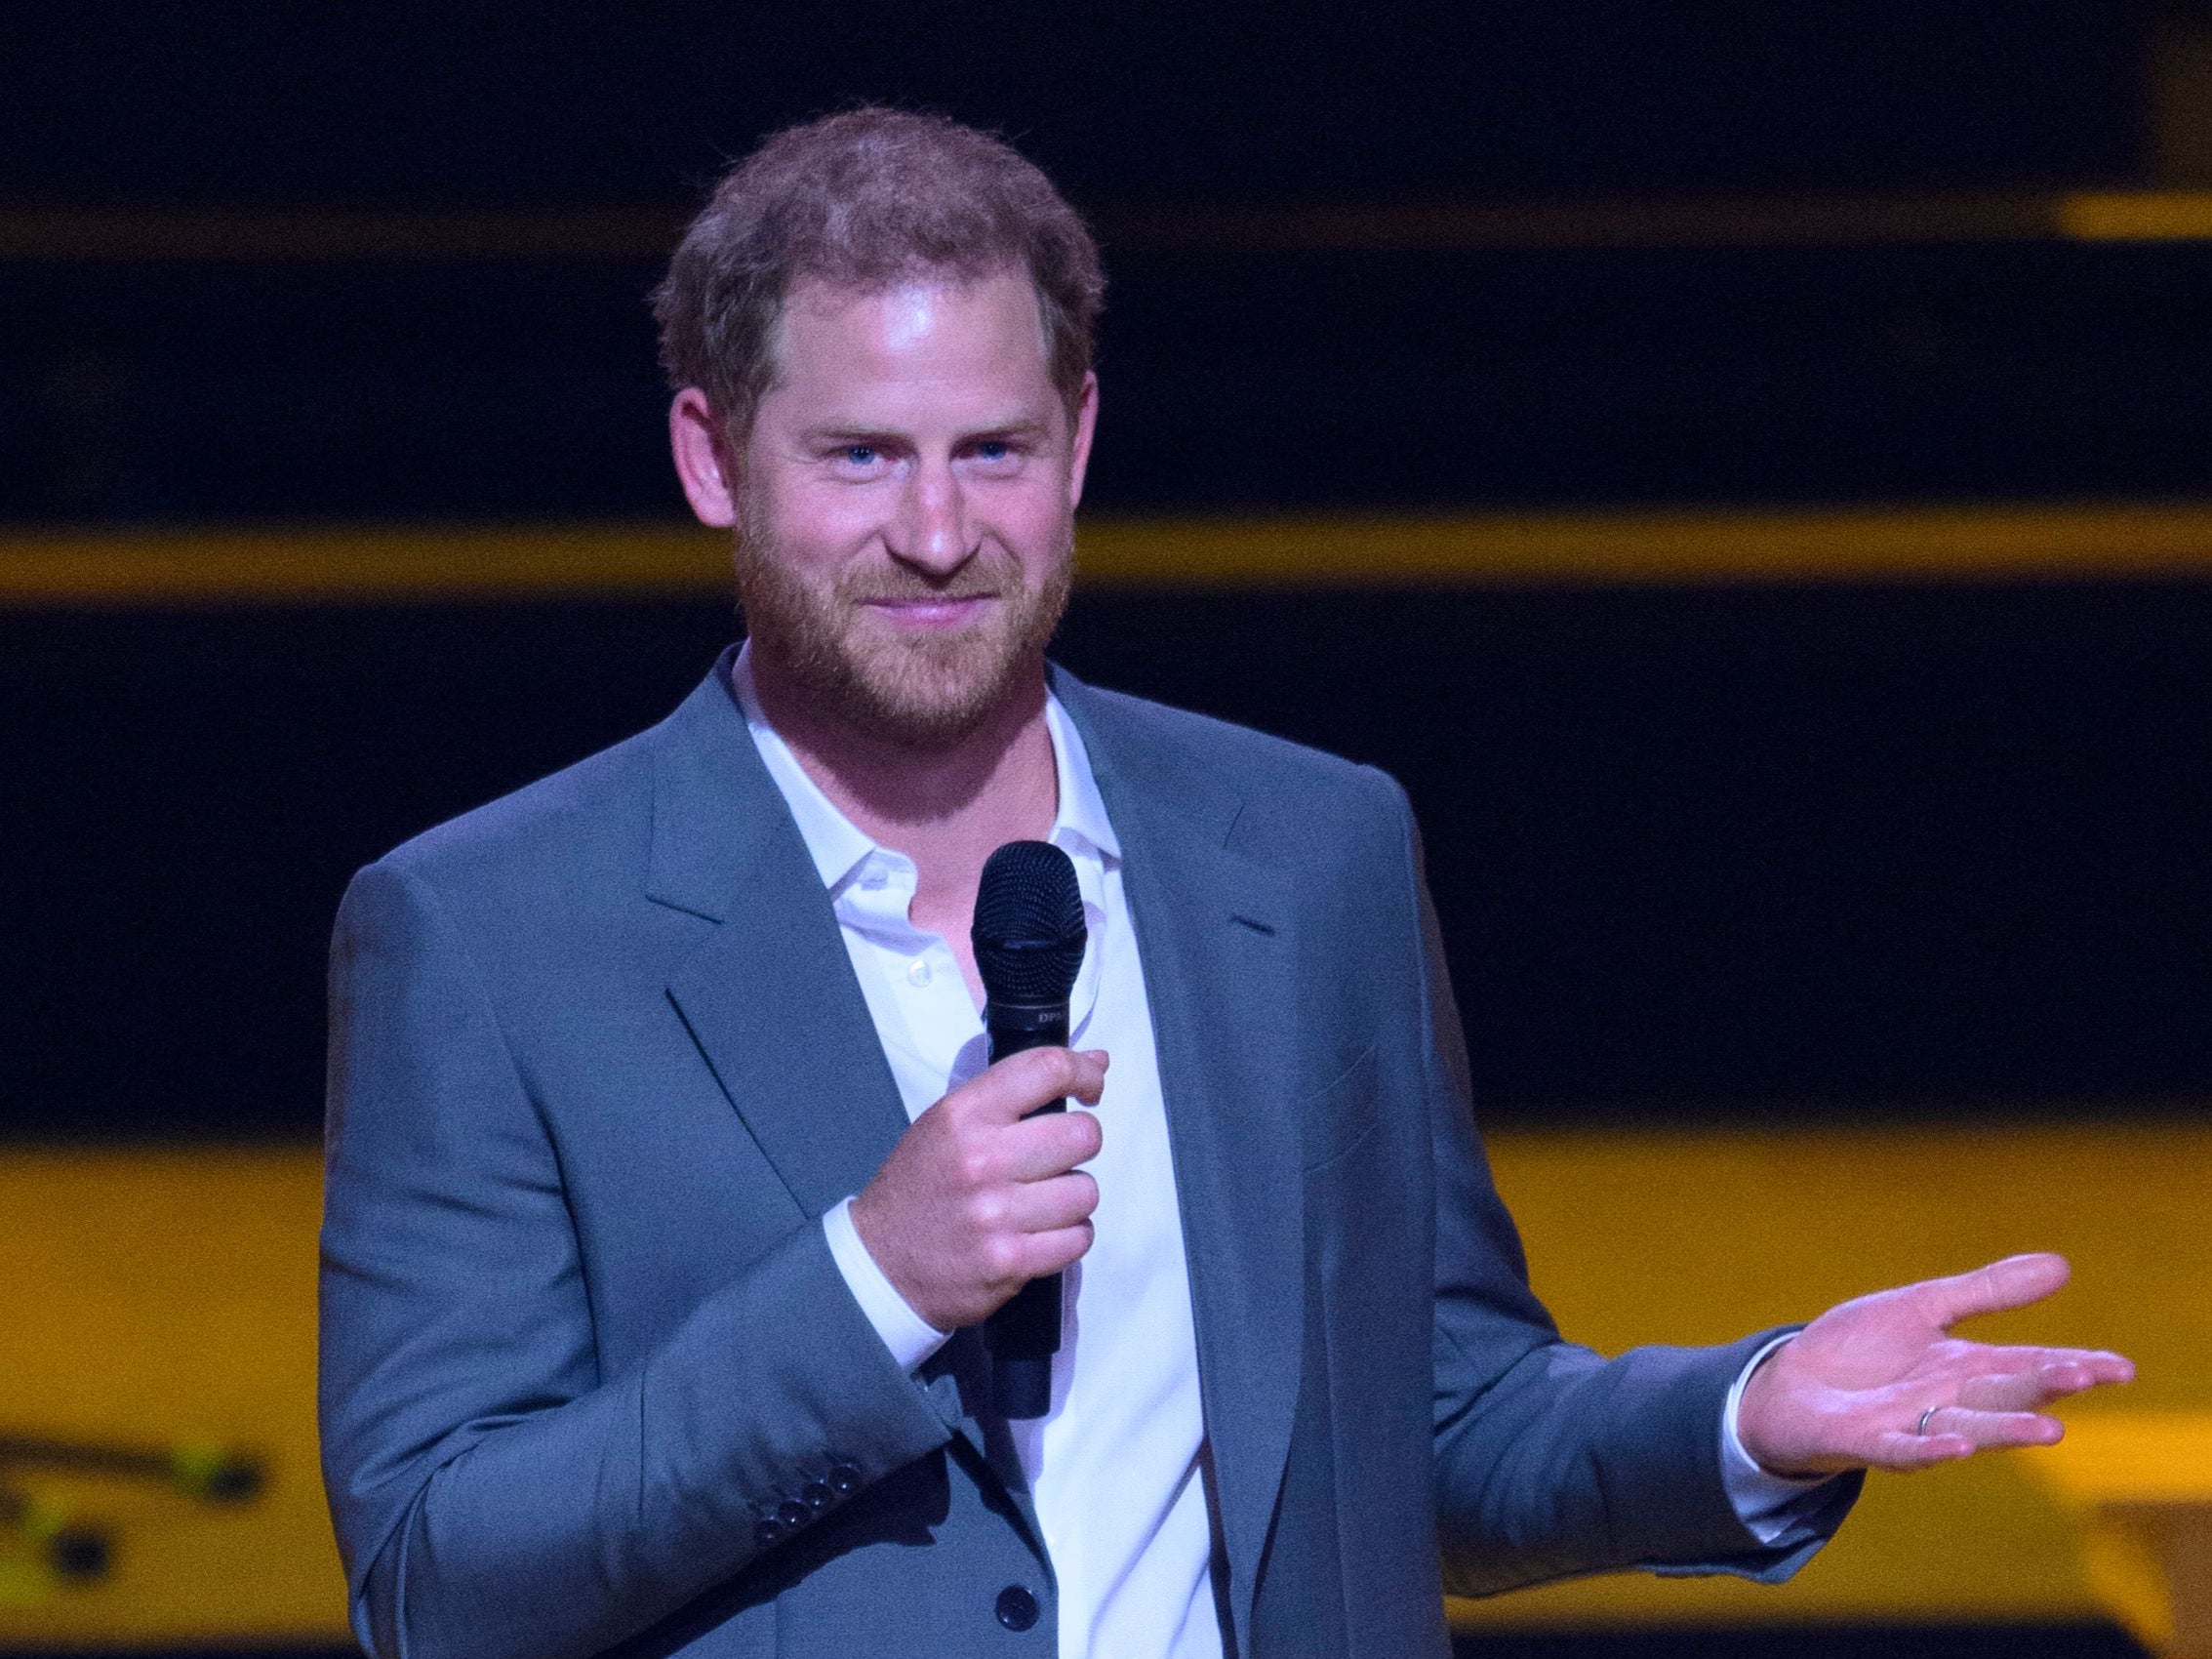 Prince Harry spoke at the opening ceremony of the Invictus Games